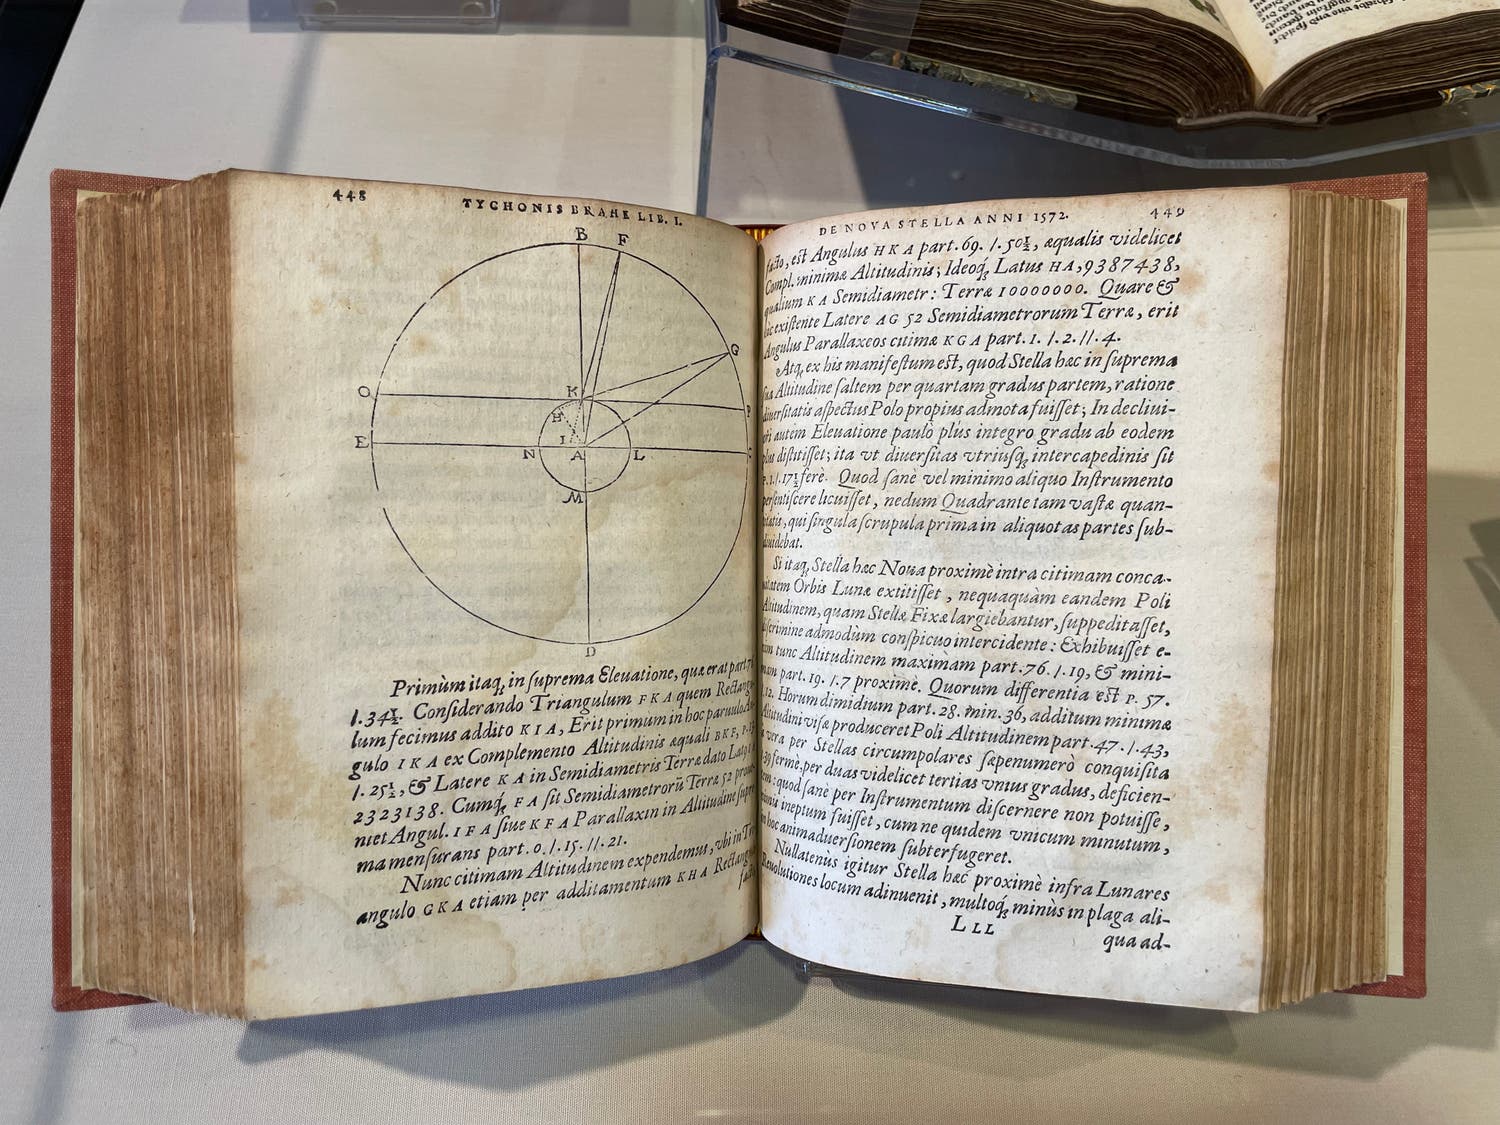 Photo of a book by Tycho Brahe, Astronomiae instauratae progymnasmata [Introduction to the New Astronomy]